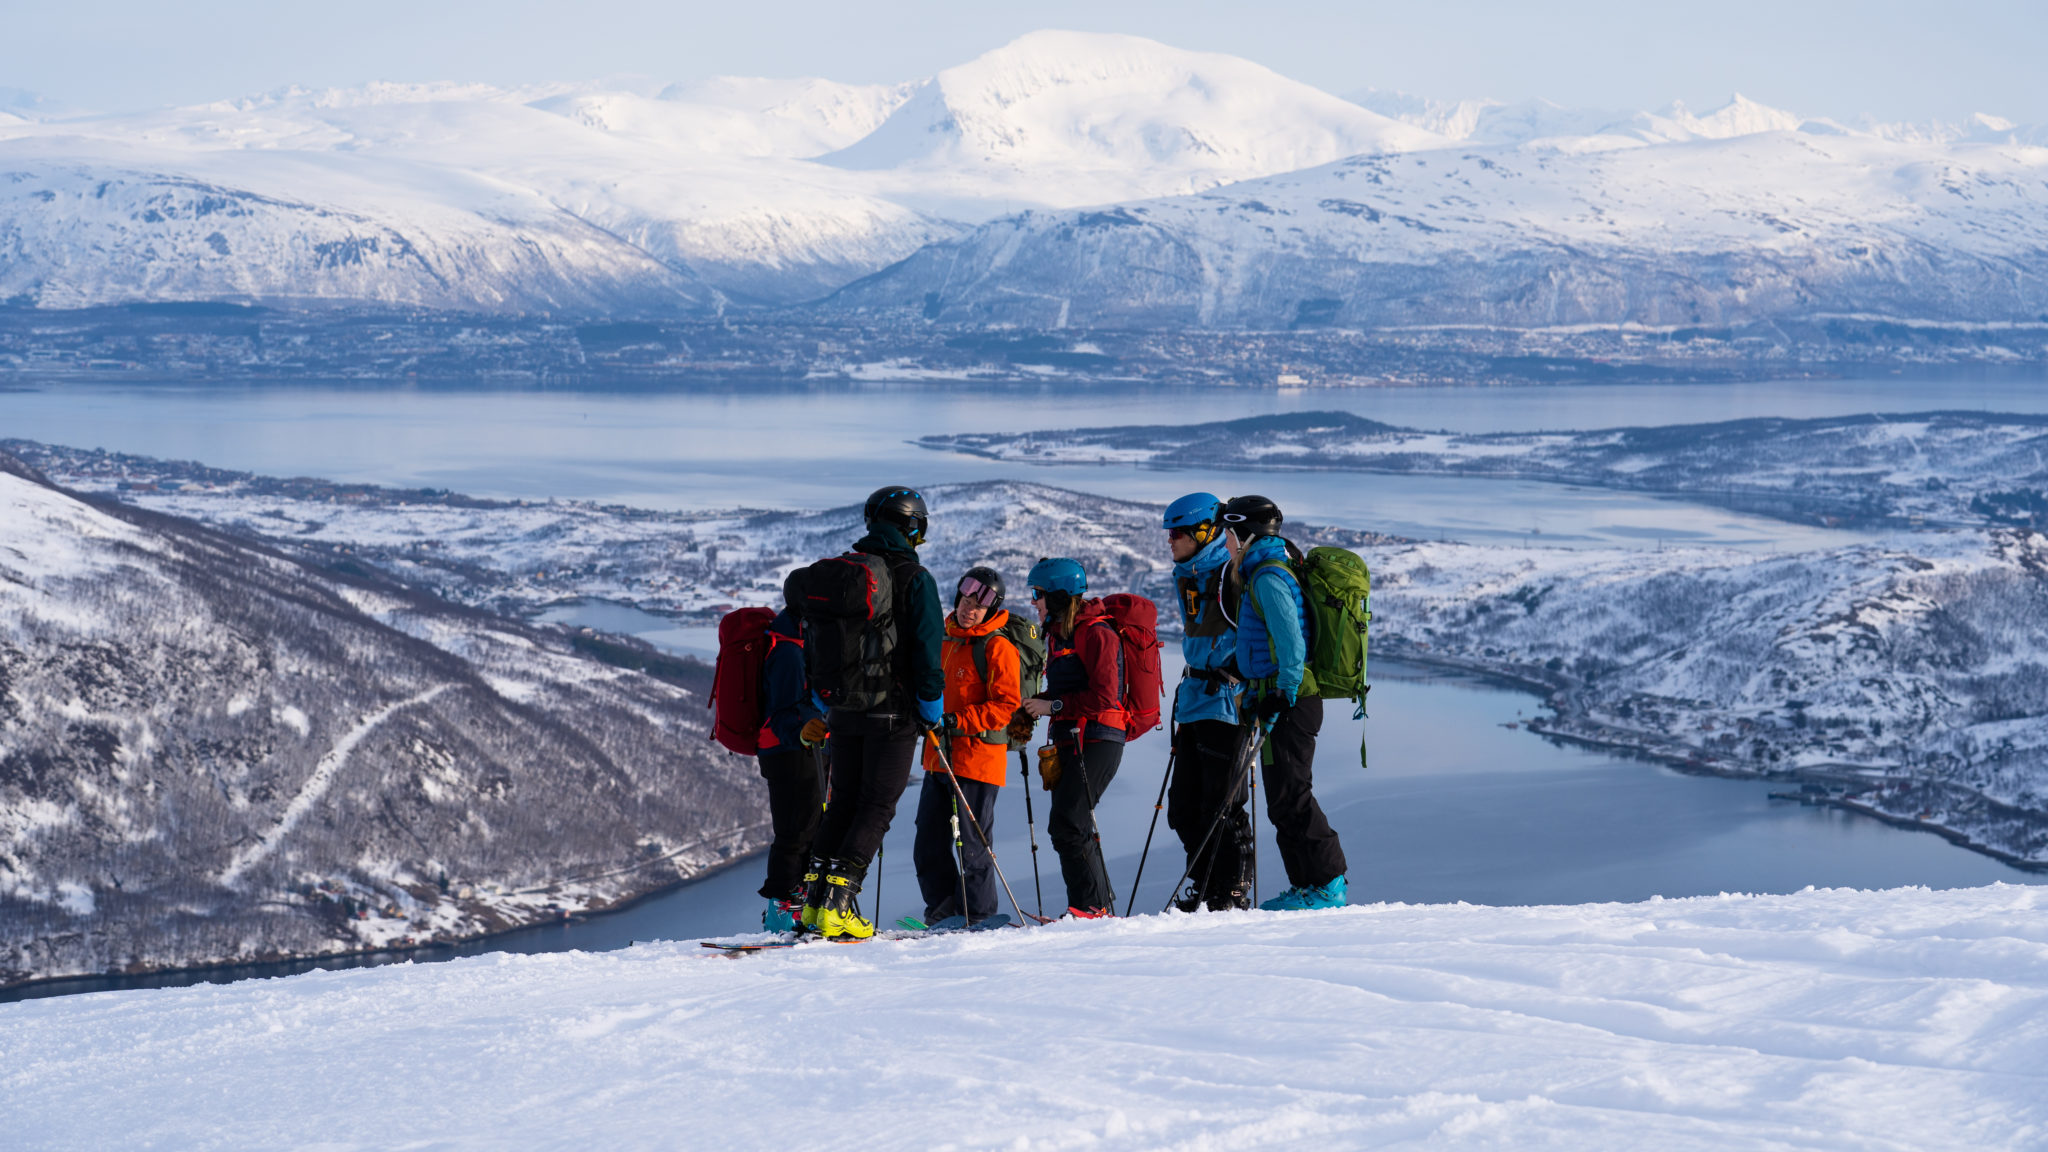 Heading up to Mount Buren with a certified guide. Parts of Tromsø are seen in the background @ Lars Petter Jonassen/NordNorsk Reiseliv AS